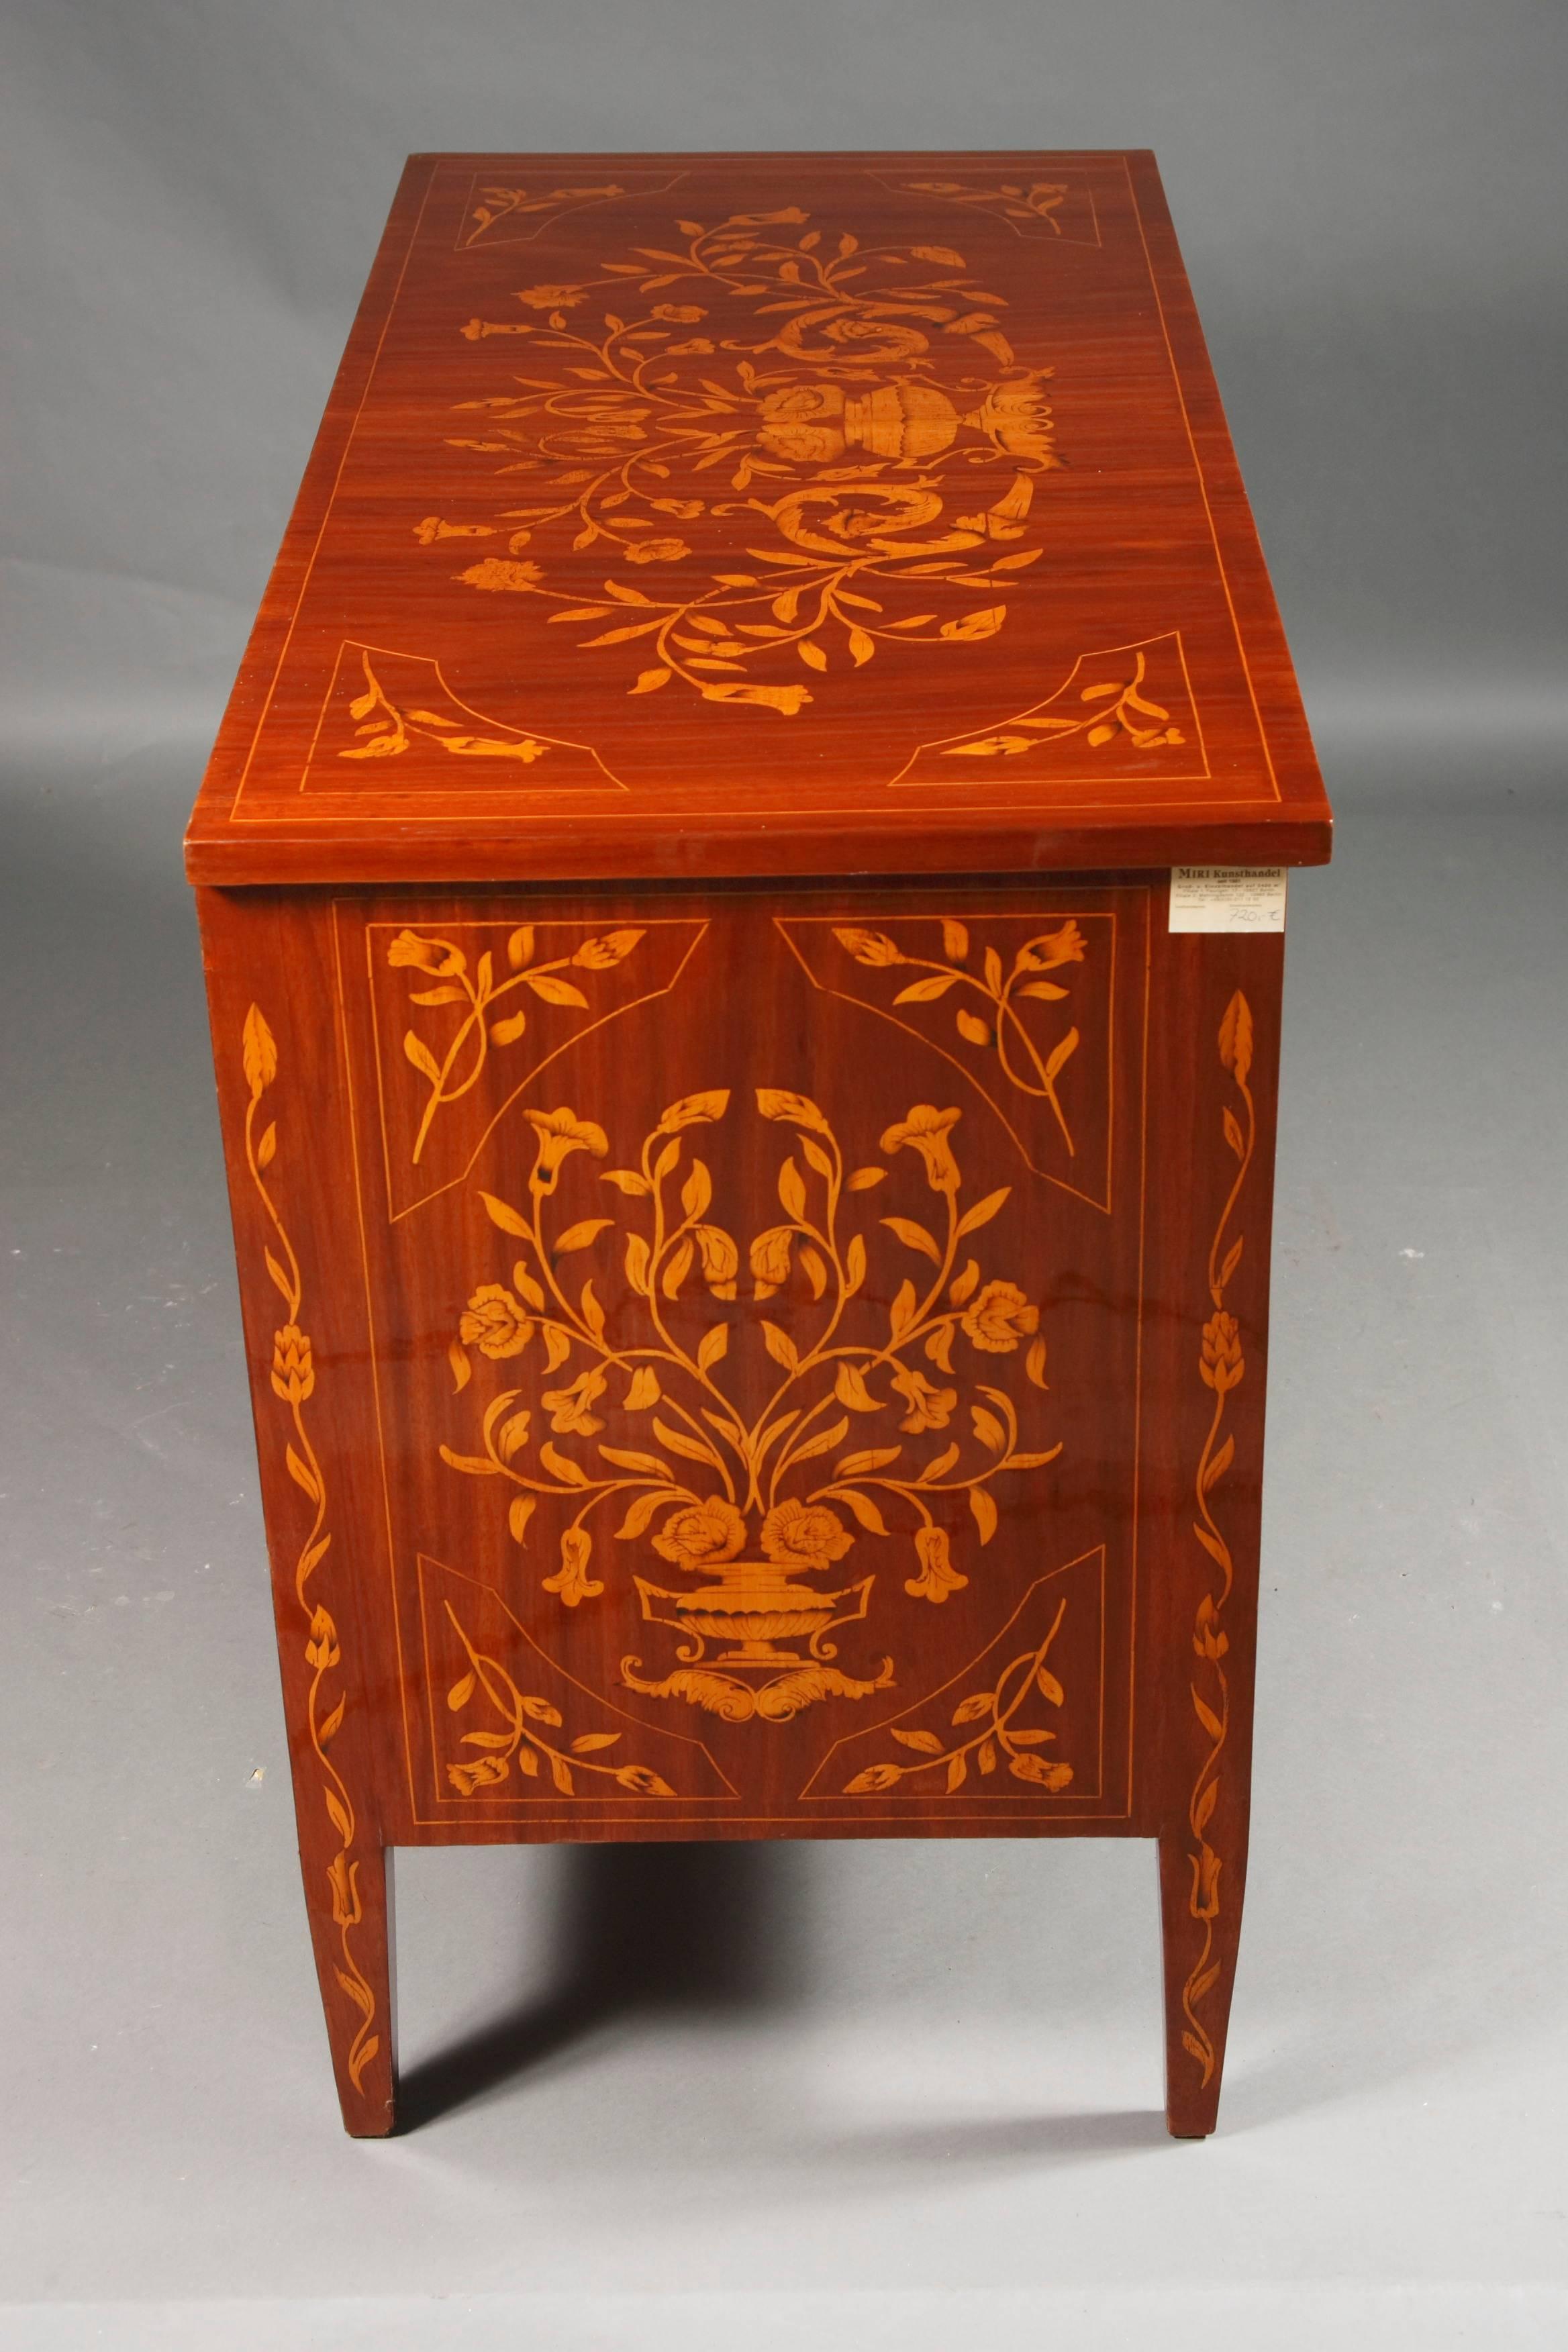 20th Century Marquetry Inlaid Commode in Neoclassical Style, Mahagony and Maple Veneer